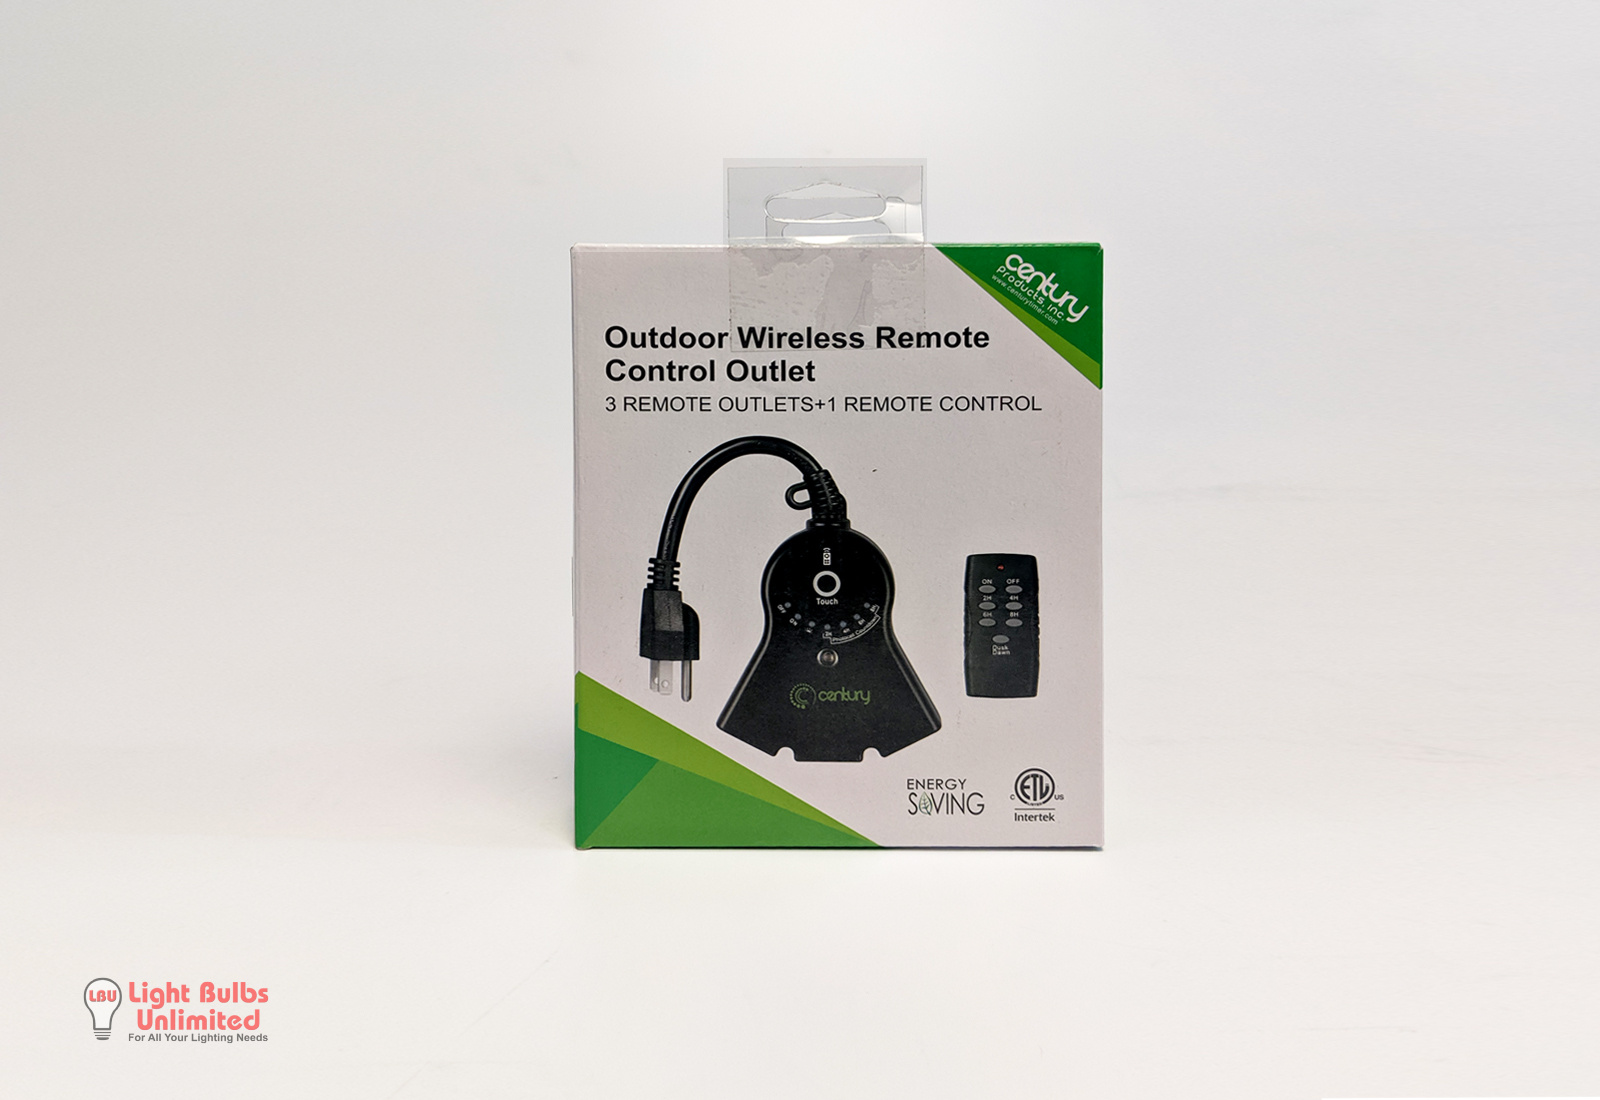 Outdoor-Wireless-remote-Outlet